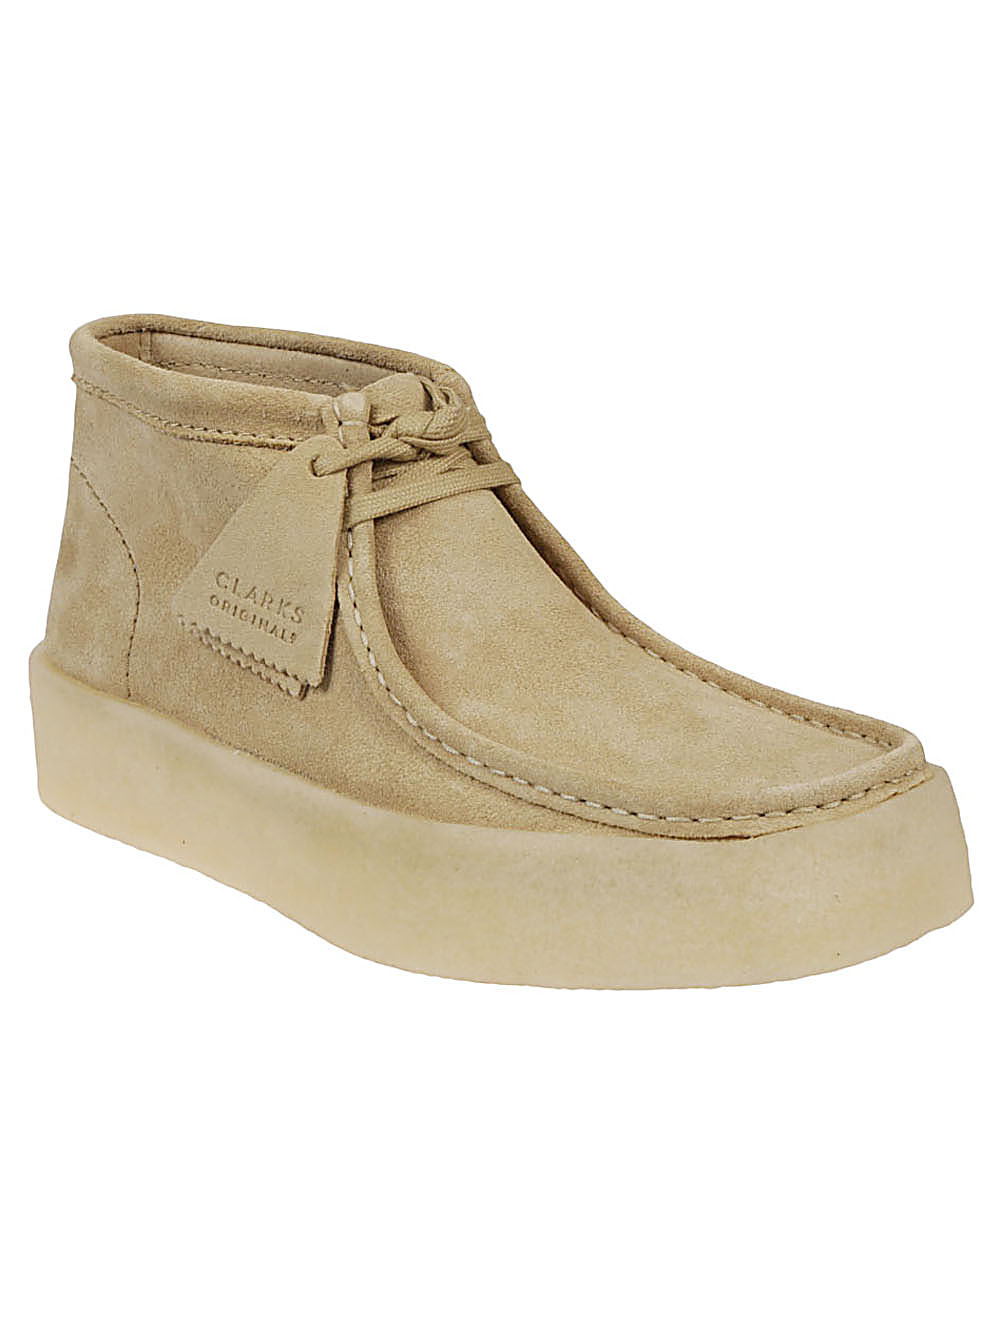 CLARKS CLARKS- Wallabee Cup Bt Suede Leather Shoes